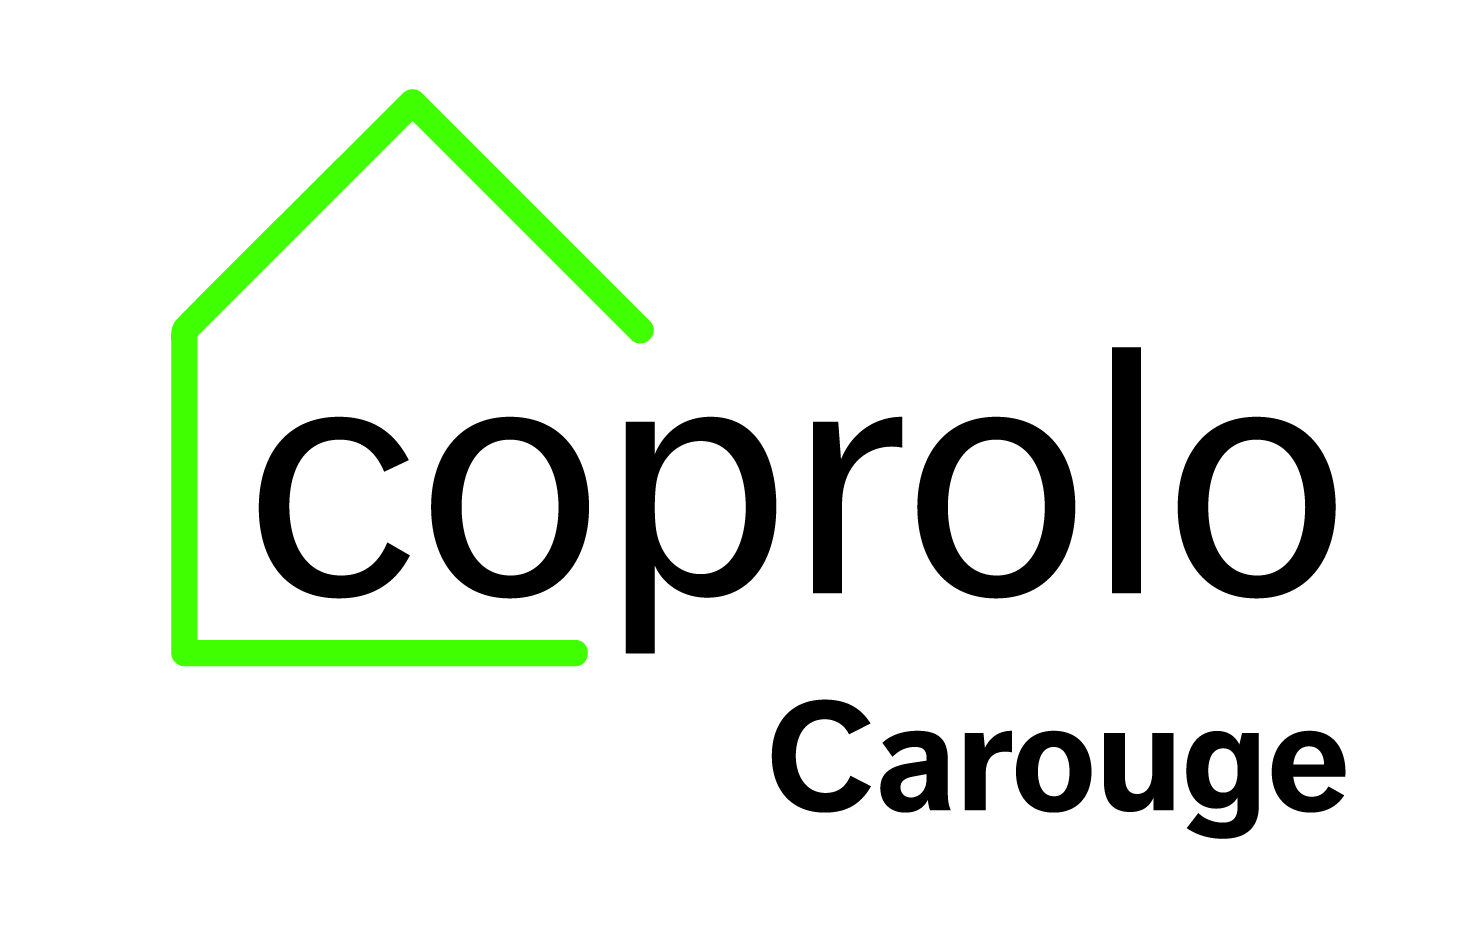 Coprolo Carouge